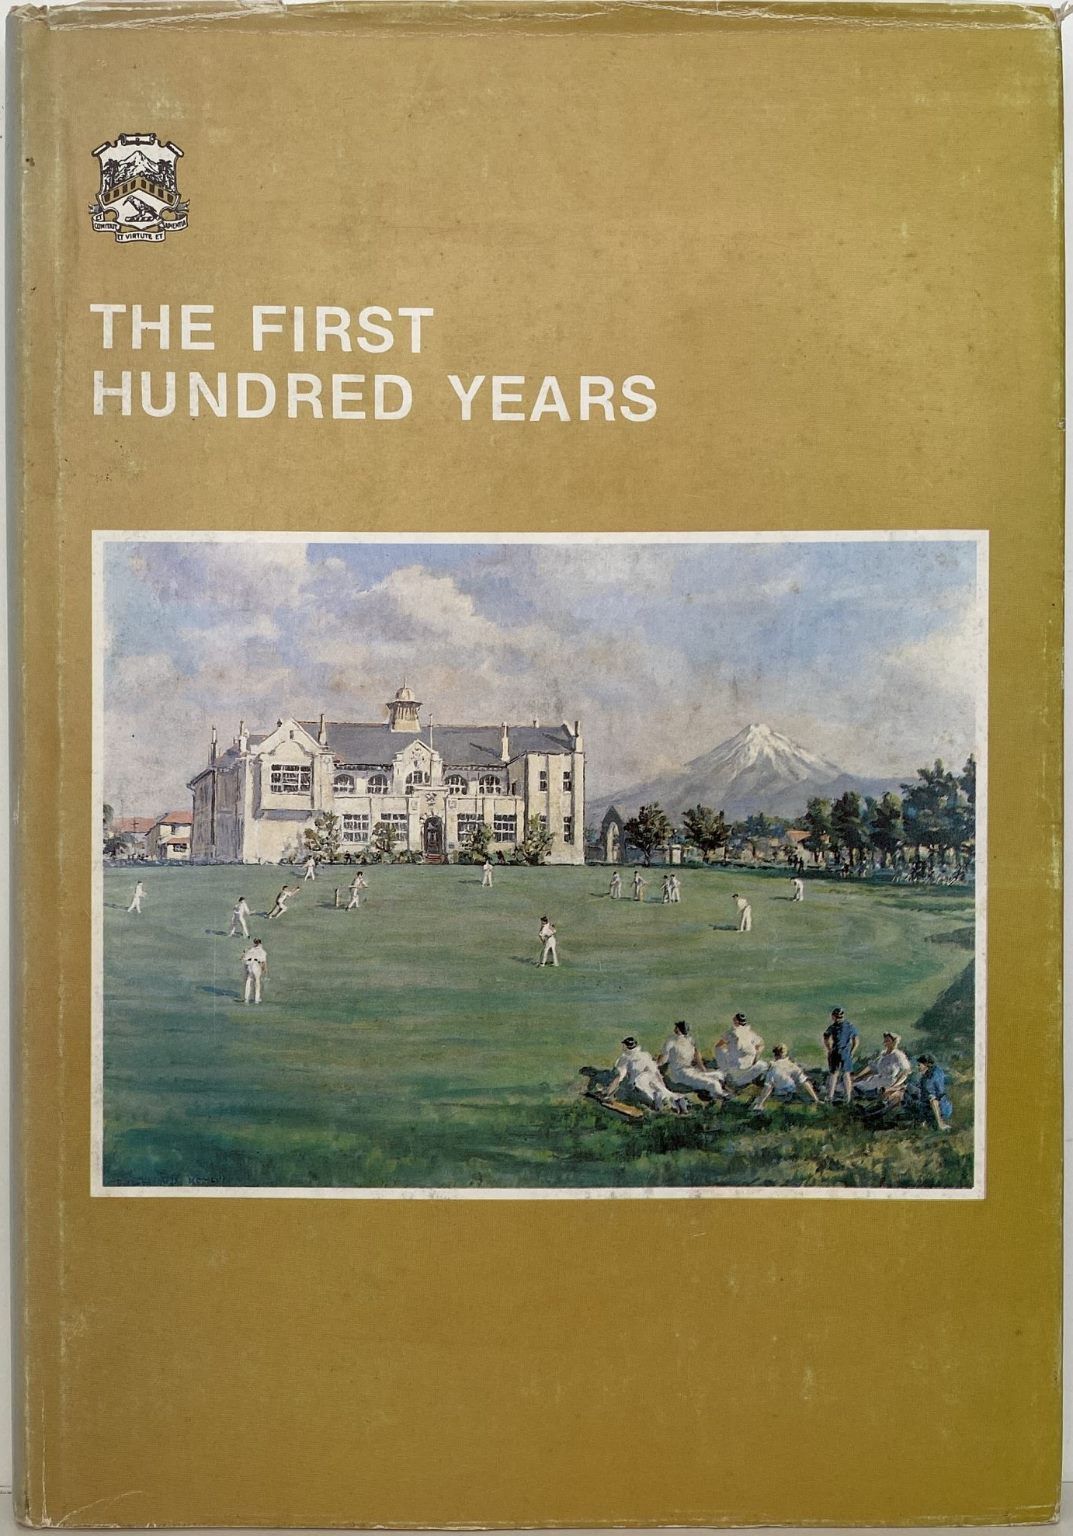 THE FIRST HUNDRED YEARS: Centenary of New Plymouth Boy's High School 1882 -1982